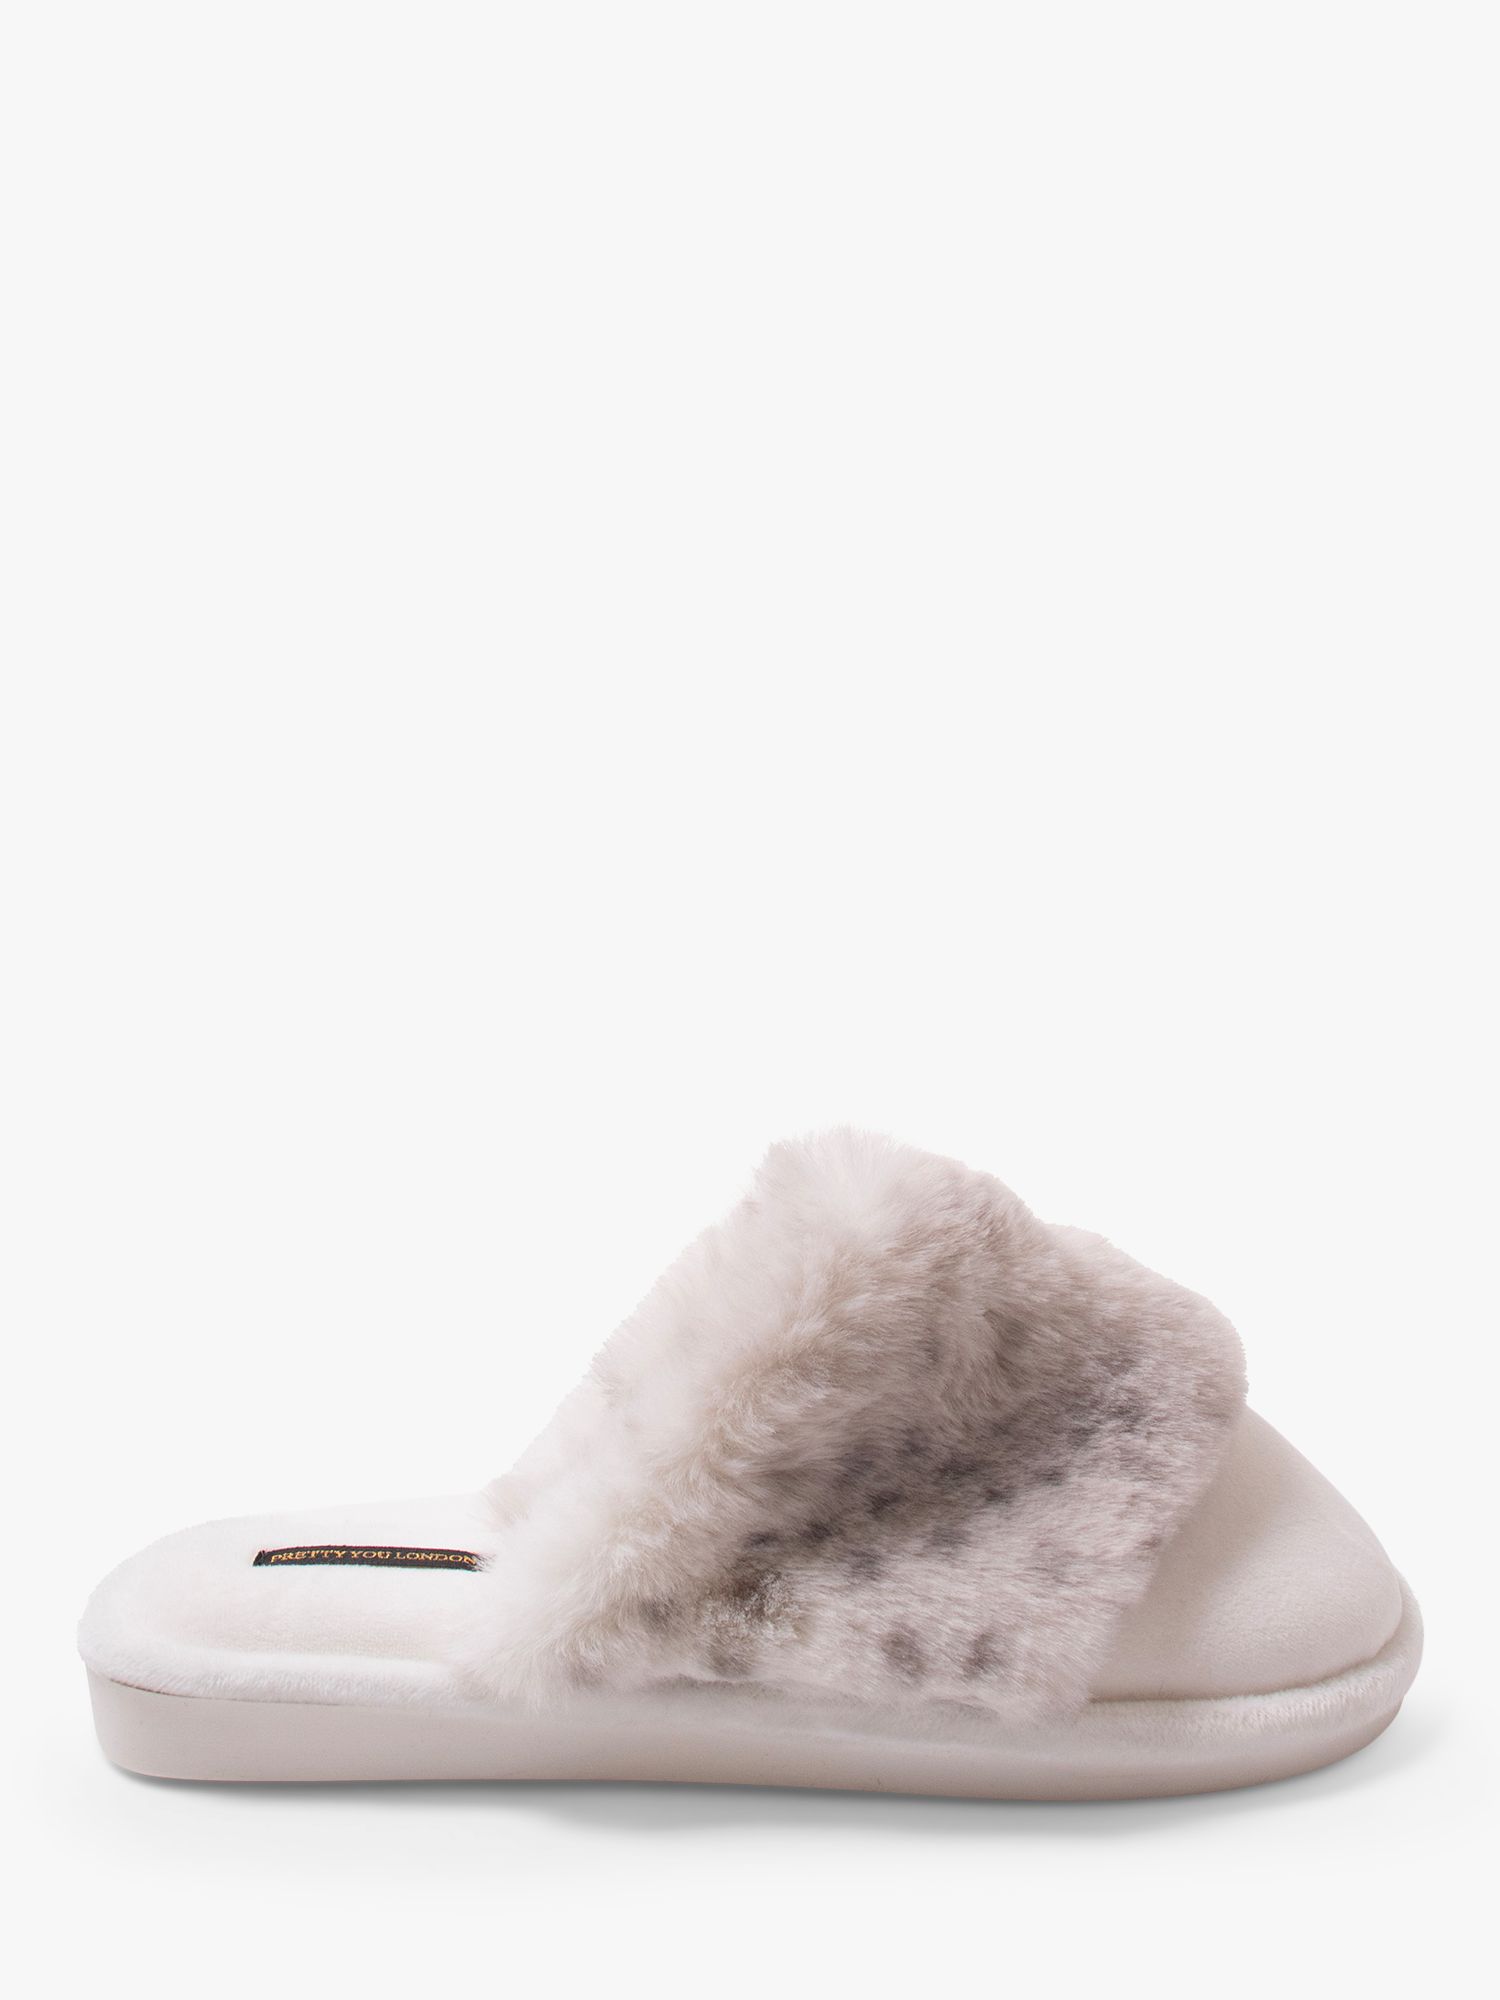 Pretty You London Danni Slippers, Snow Leopard at John Lewis & Partners